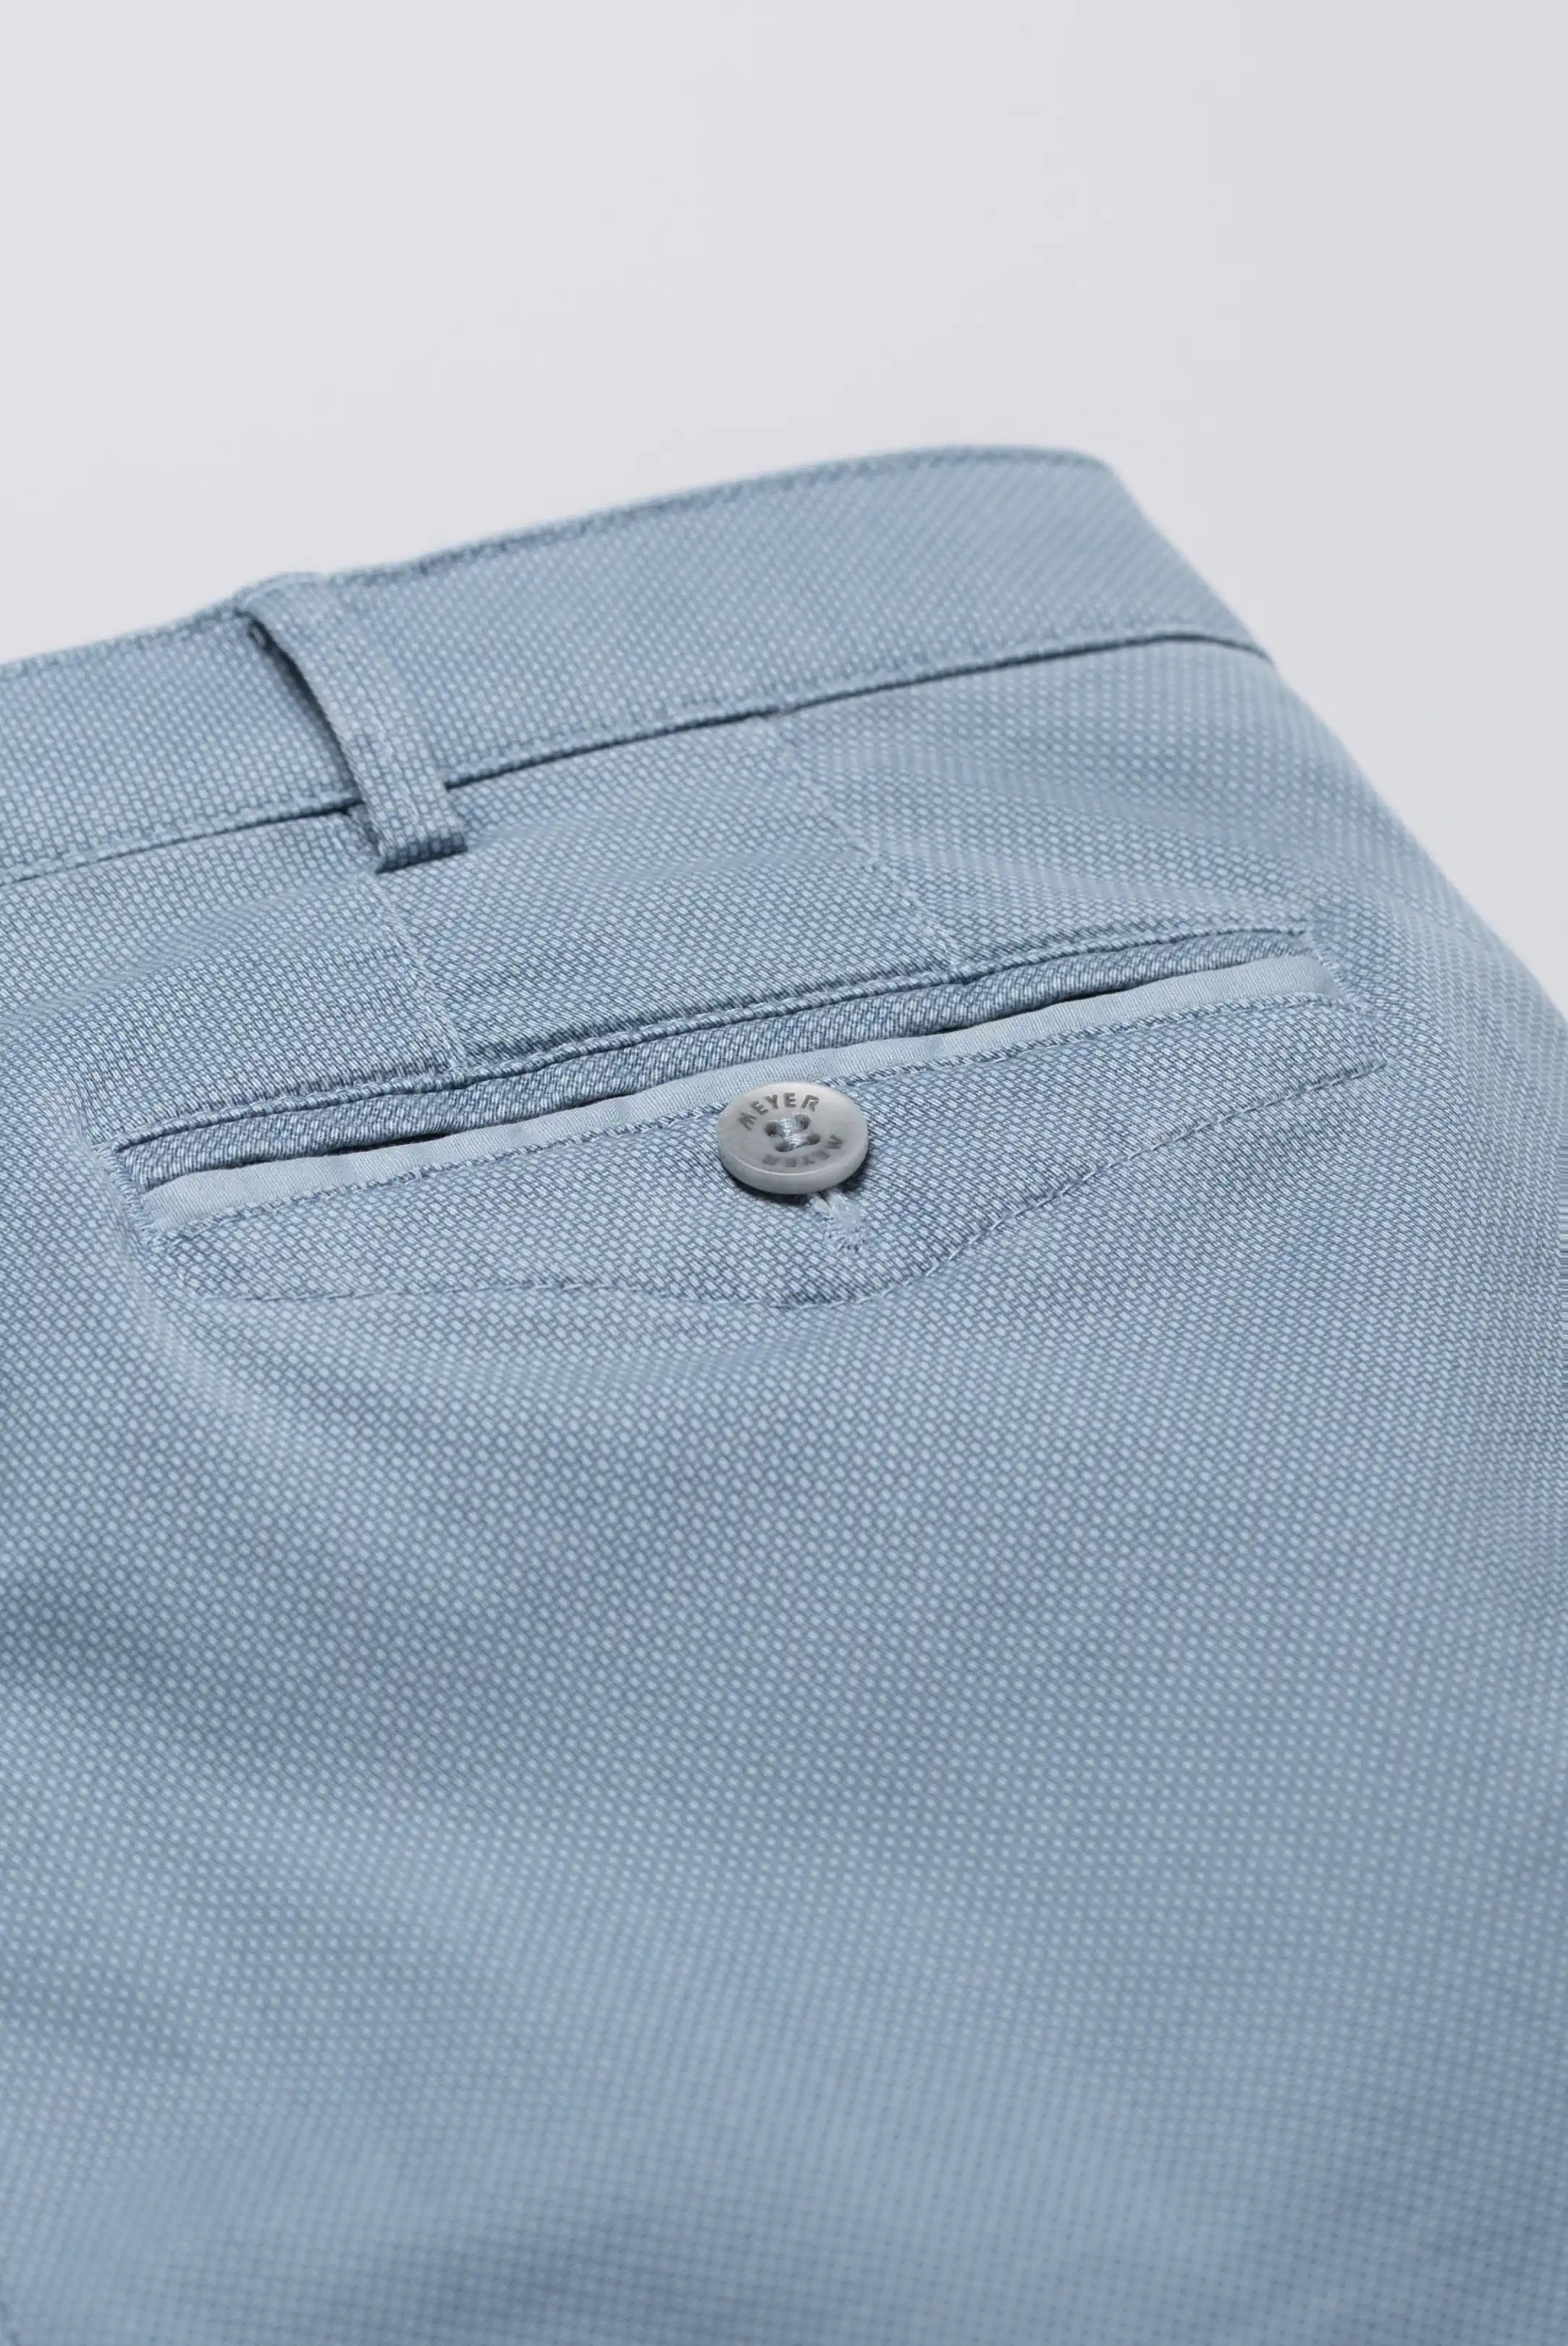 MEYER Trousers - Chicago 5056 Micro Print Chinos - Blue